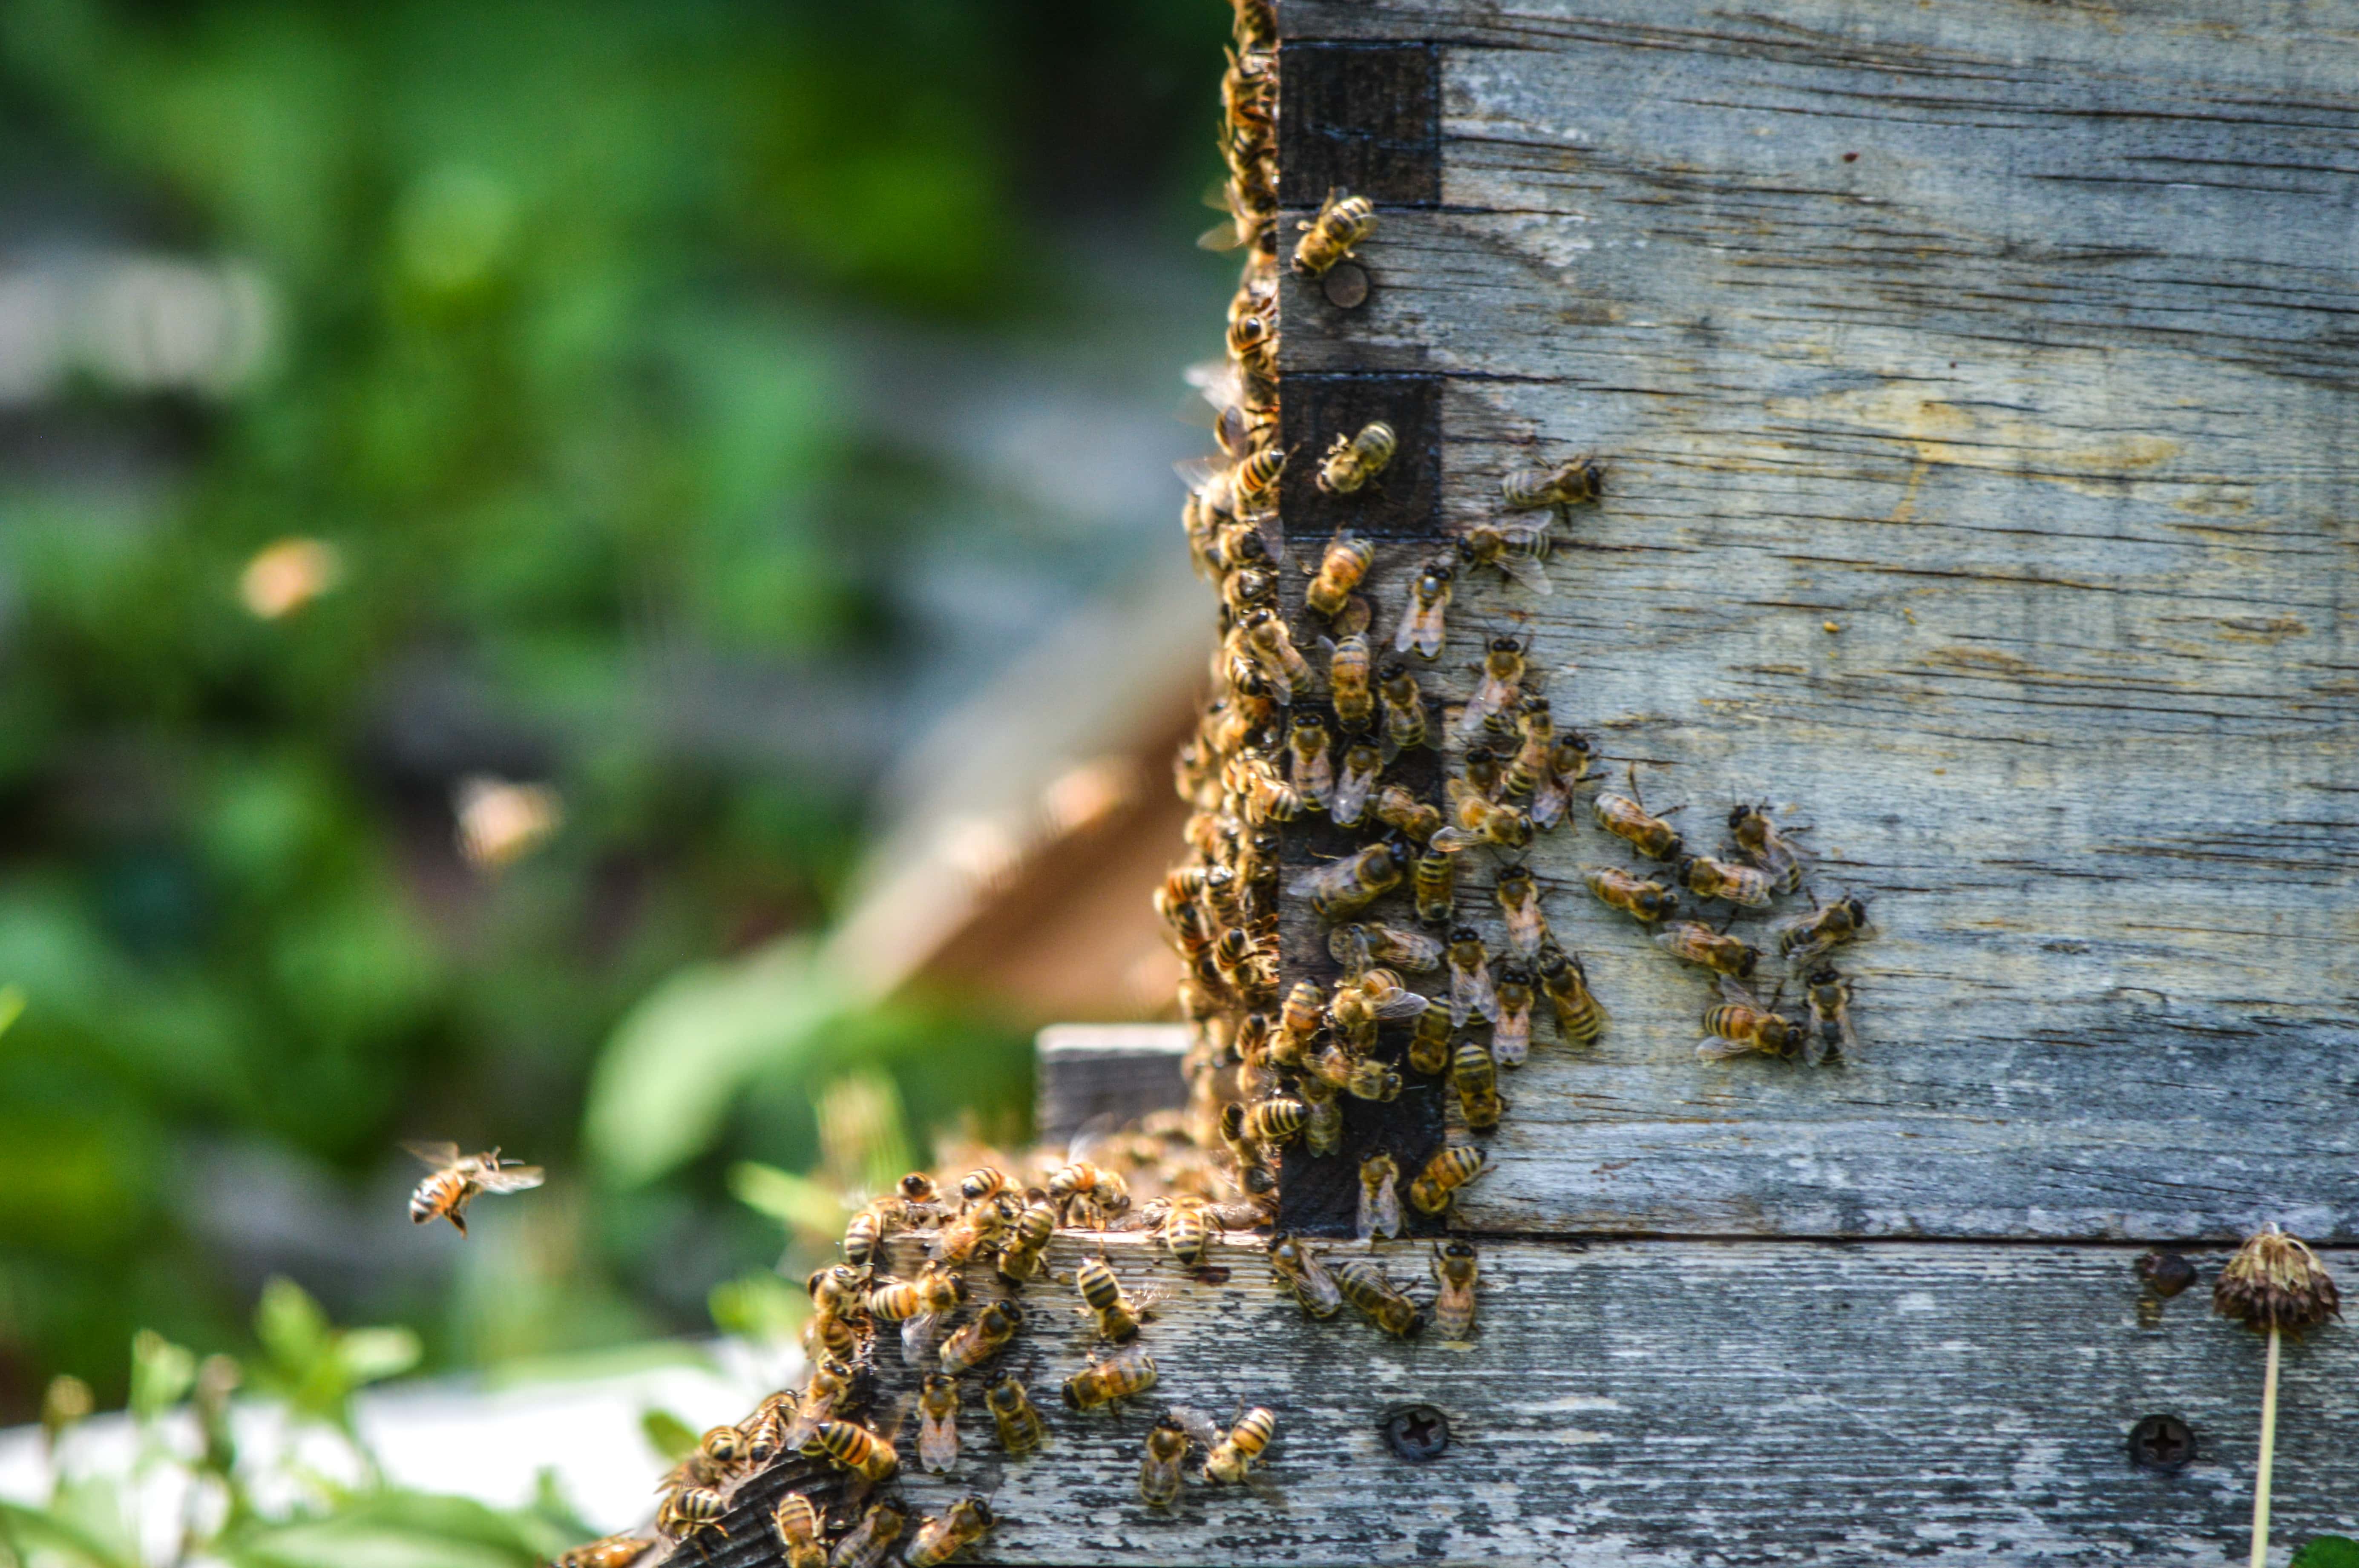 Swarm of honey bees on the side of a Langstroth beehive.